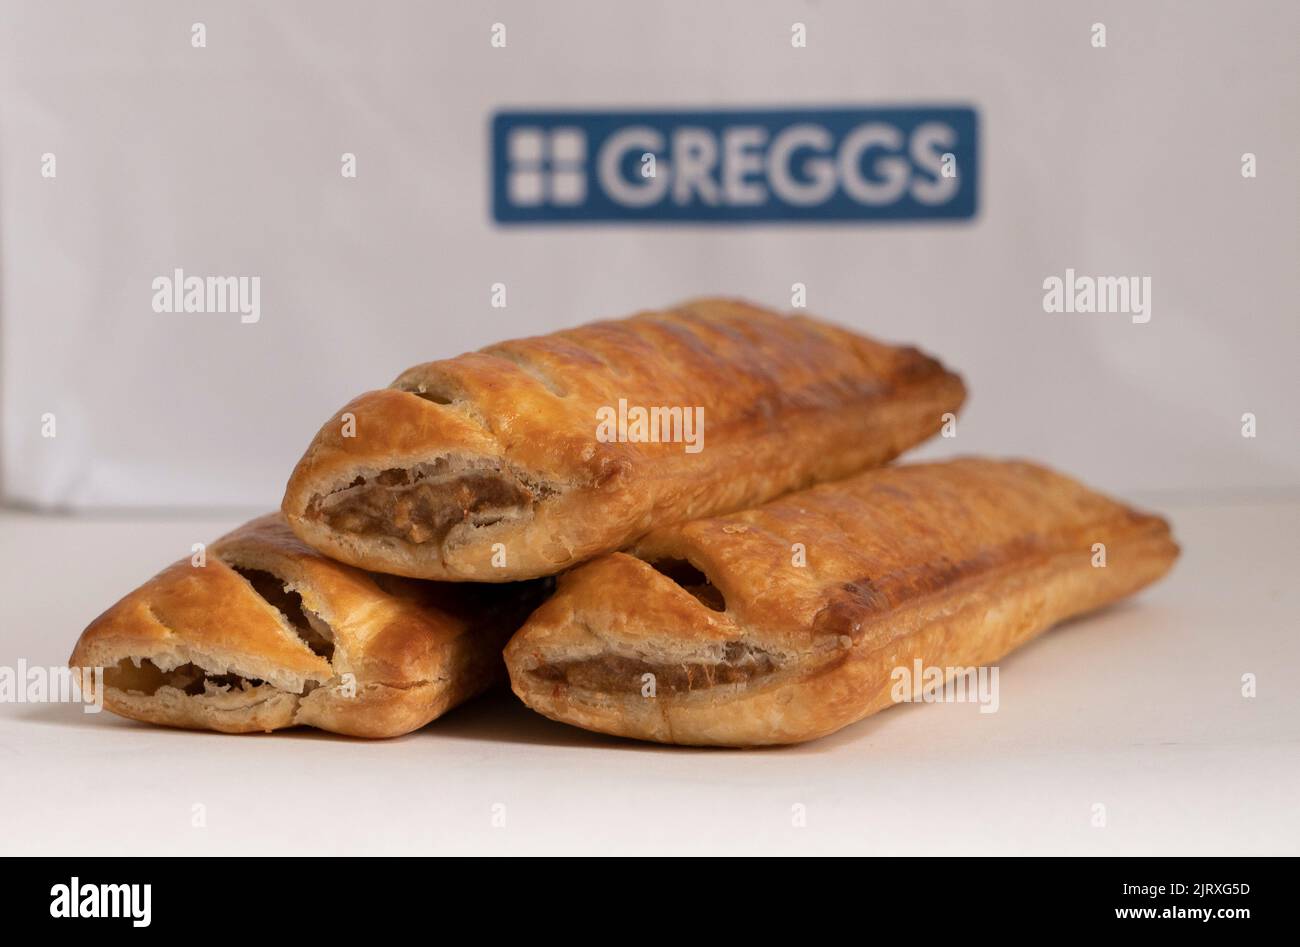 Greggs sales up 27% PH Jeff Moore 02/08/2022 Bakery chain Greggs said its sales jumped in the first half of the year as customers turned to value meal Stock Photo